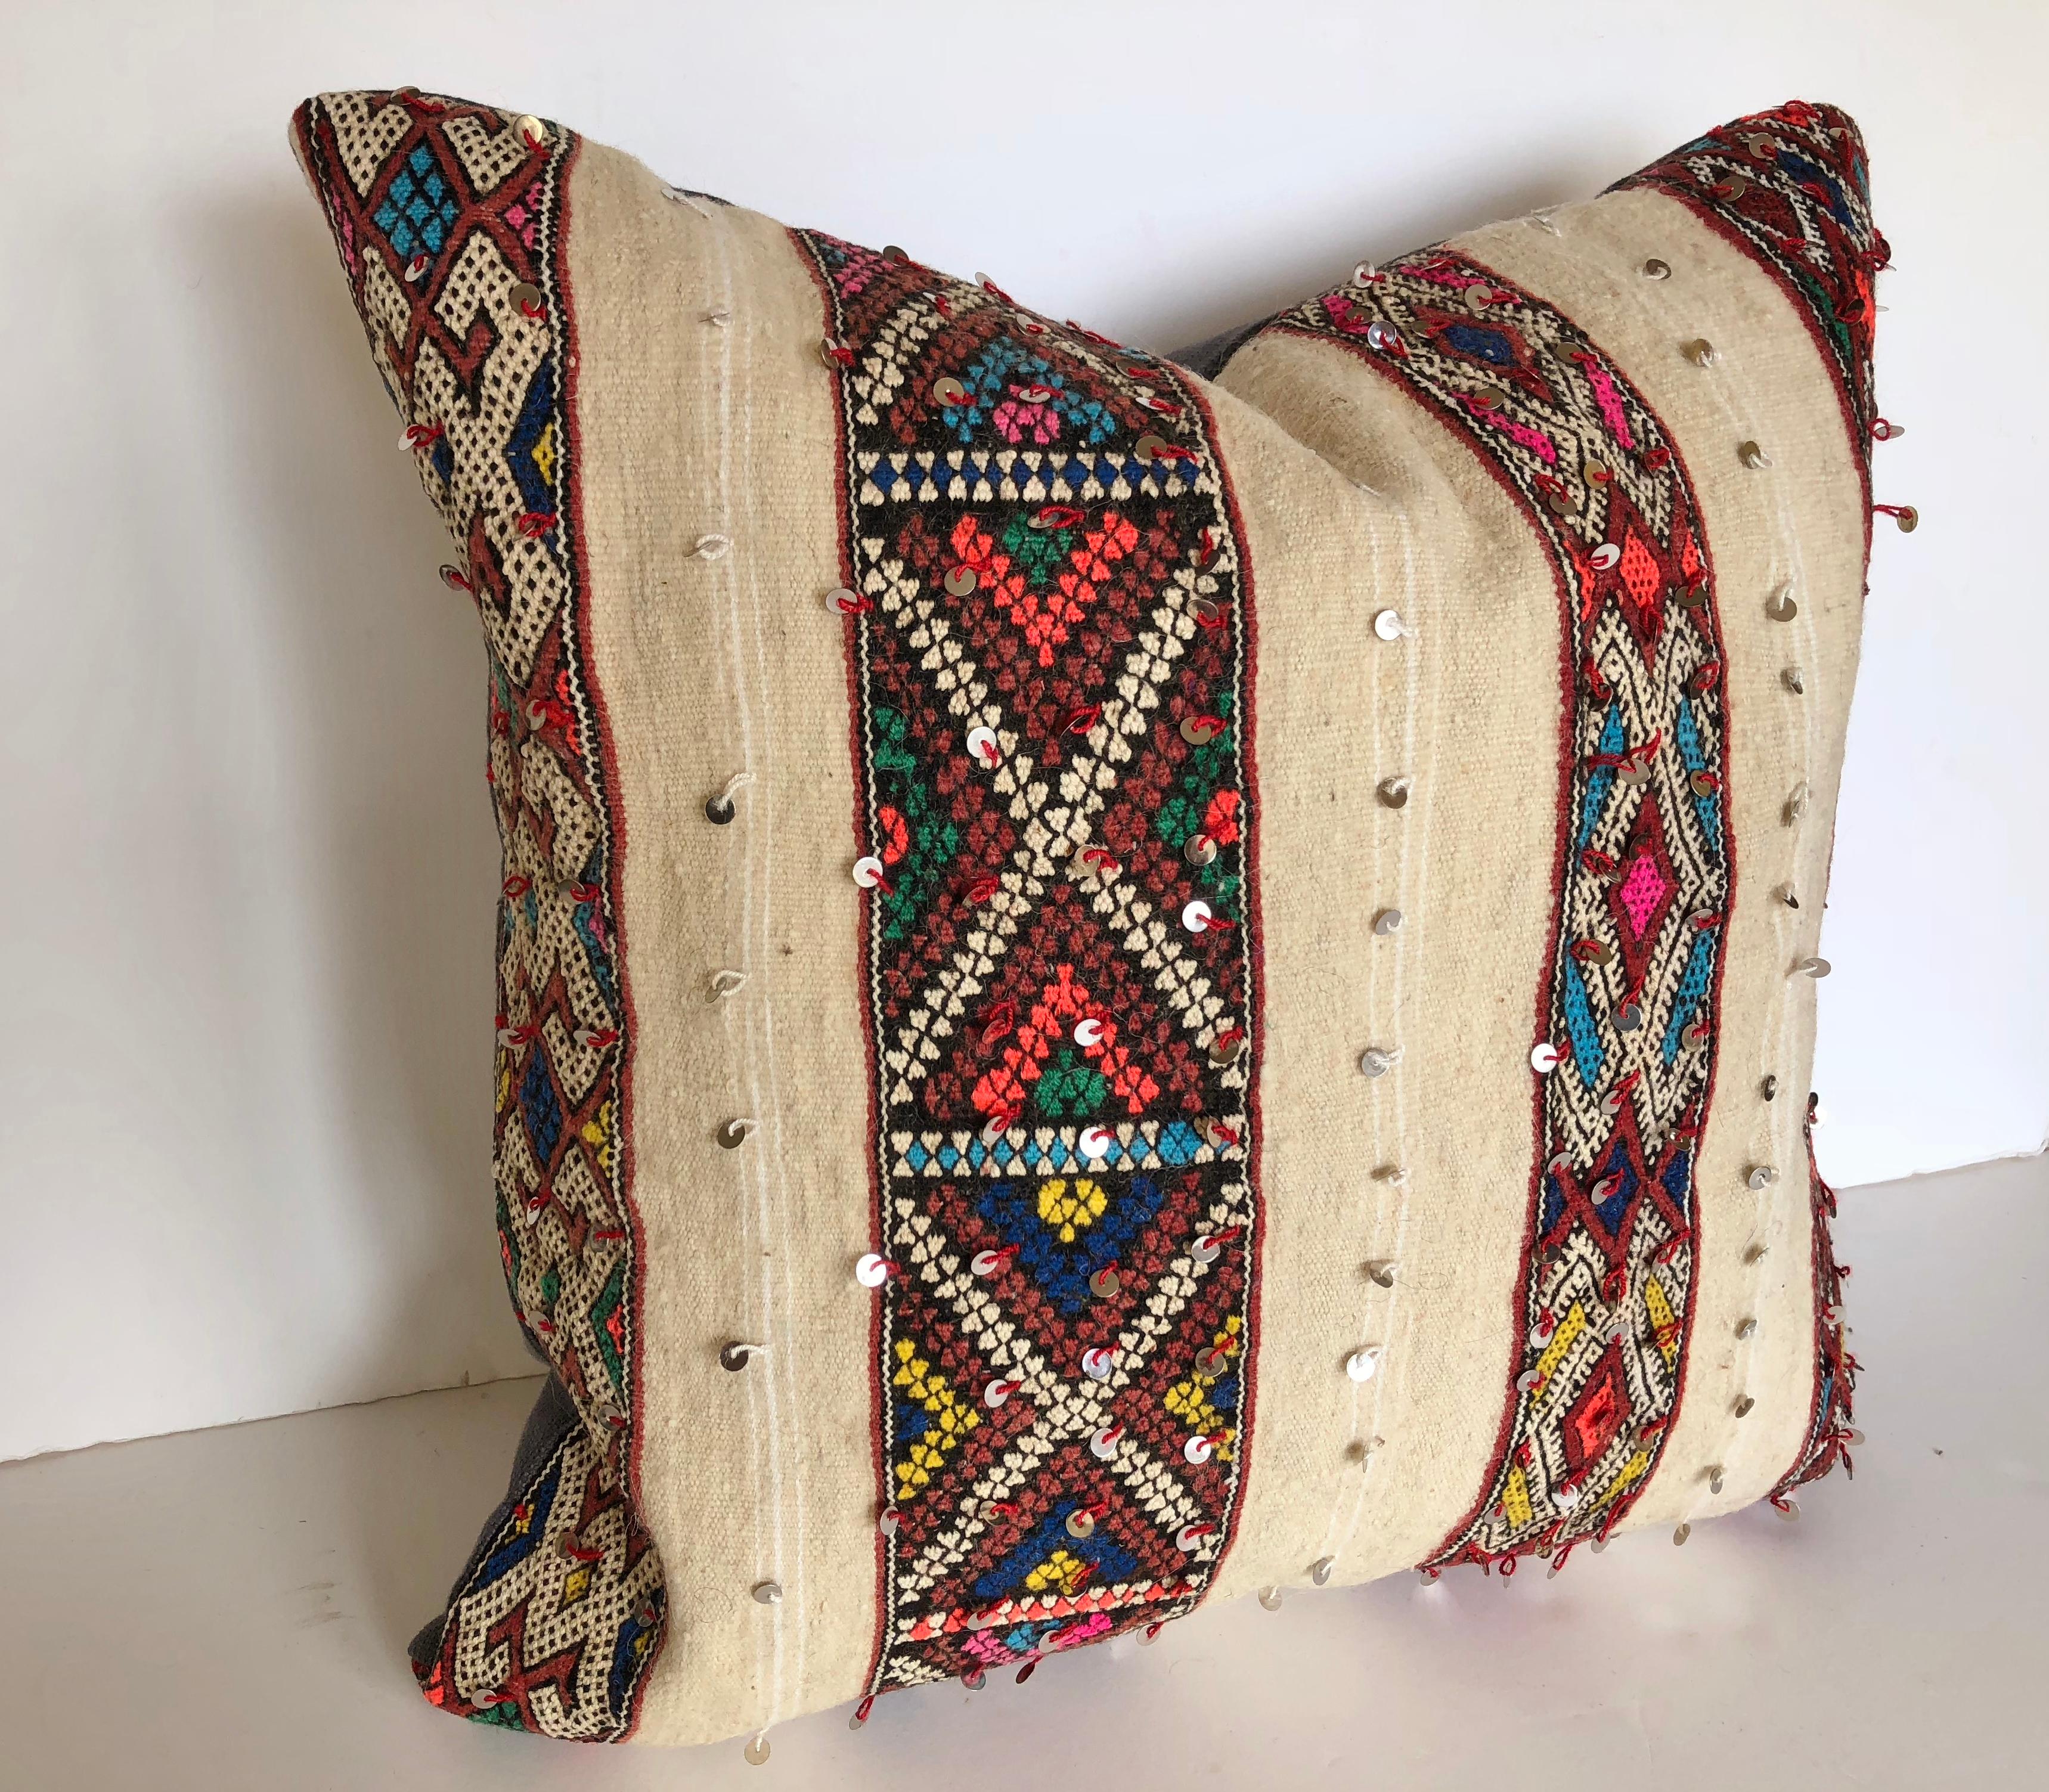 Custom pillow cut from a vintage hand loomed wool vintage Moroccan rug made by the Berber women of the Atlas Mountains. Brightly colored bands are embellished with sequins against a creamy wool textile. Pillow is backed in purple linen, filled with